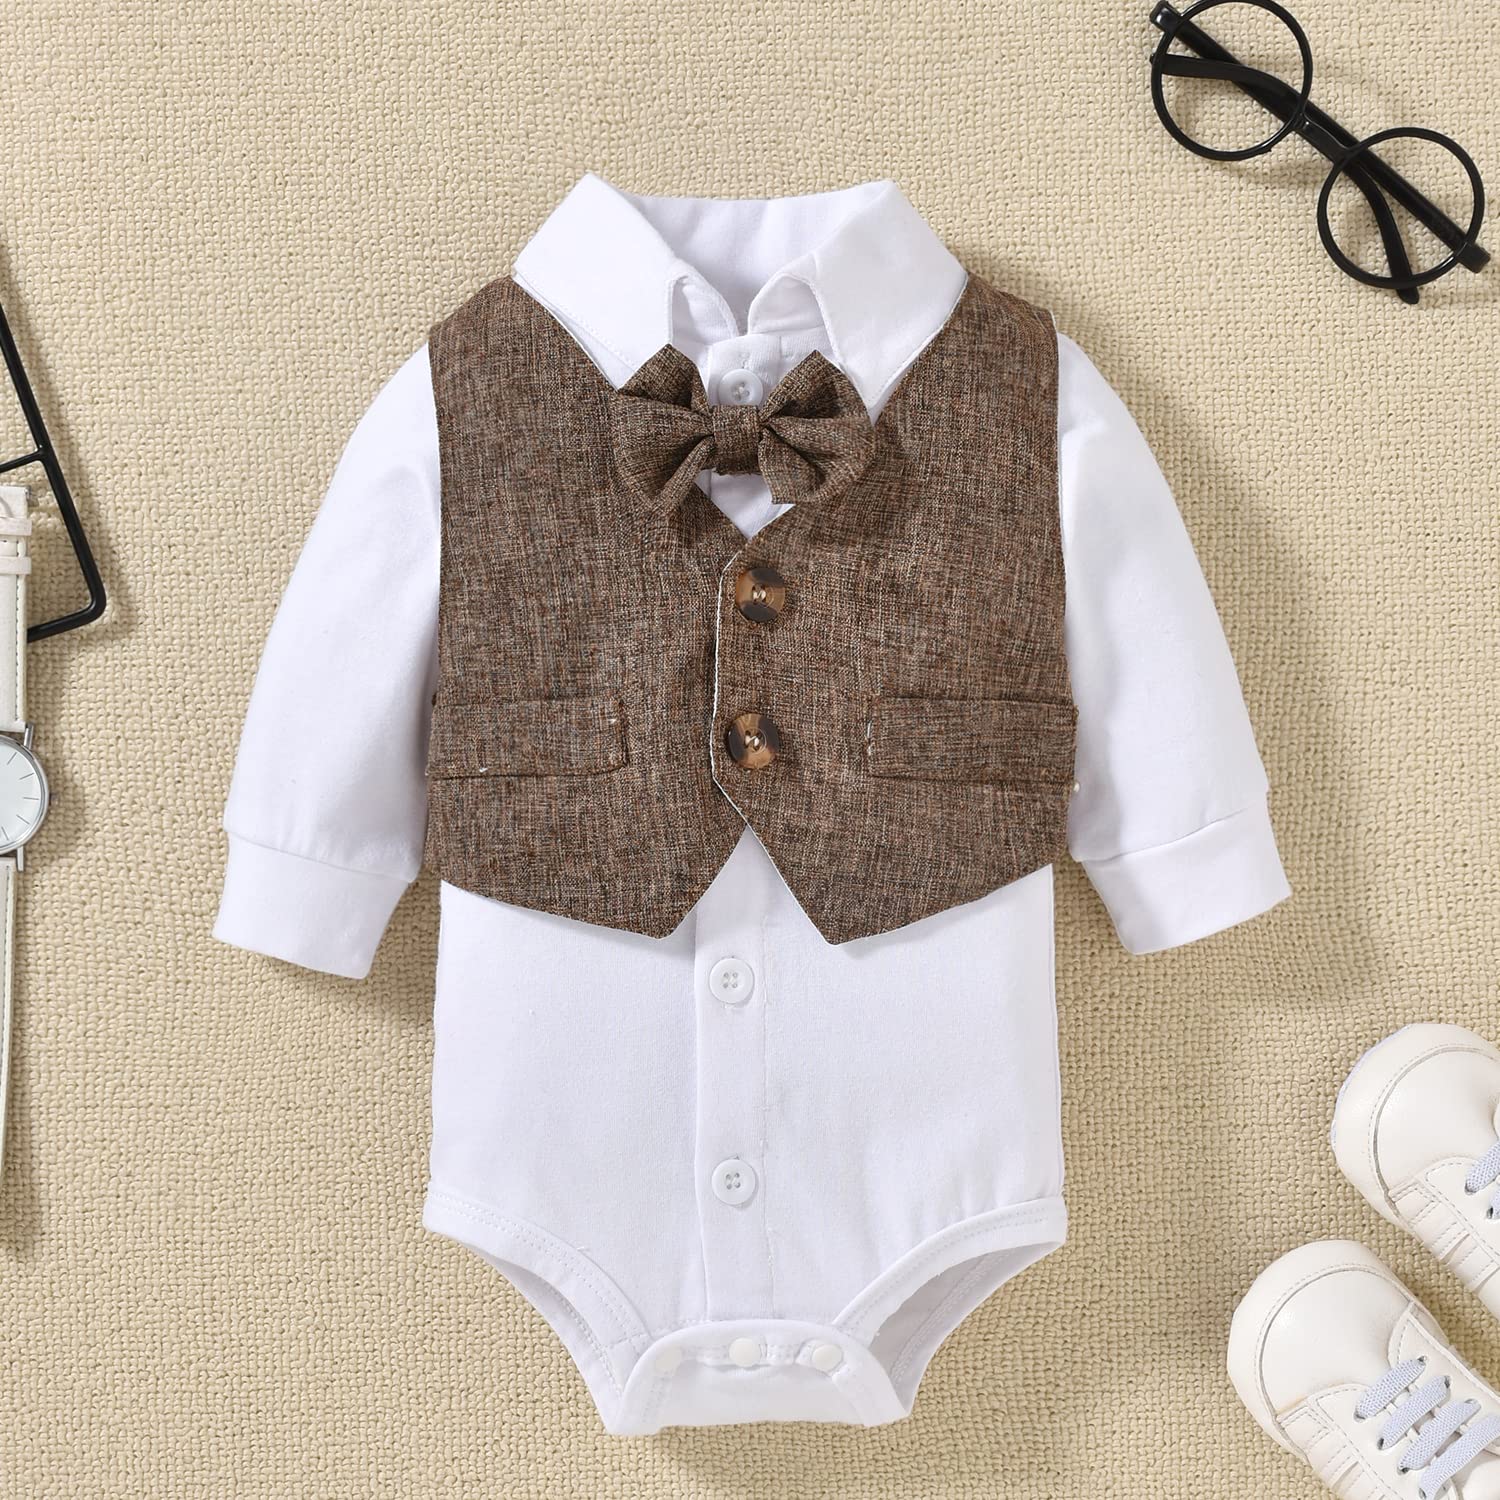 Baby Boys Gentleman Outfit 3 Piece Formal Suit Set with Snaps